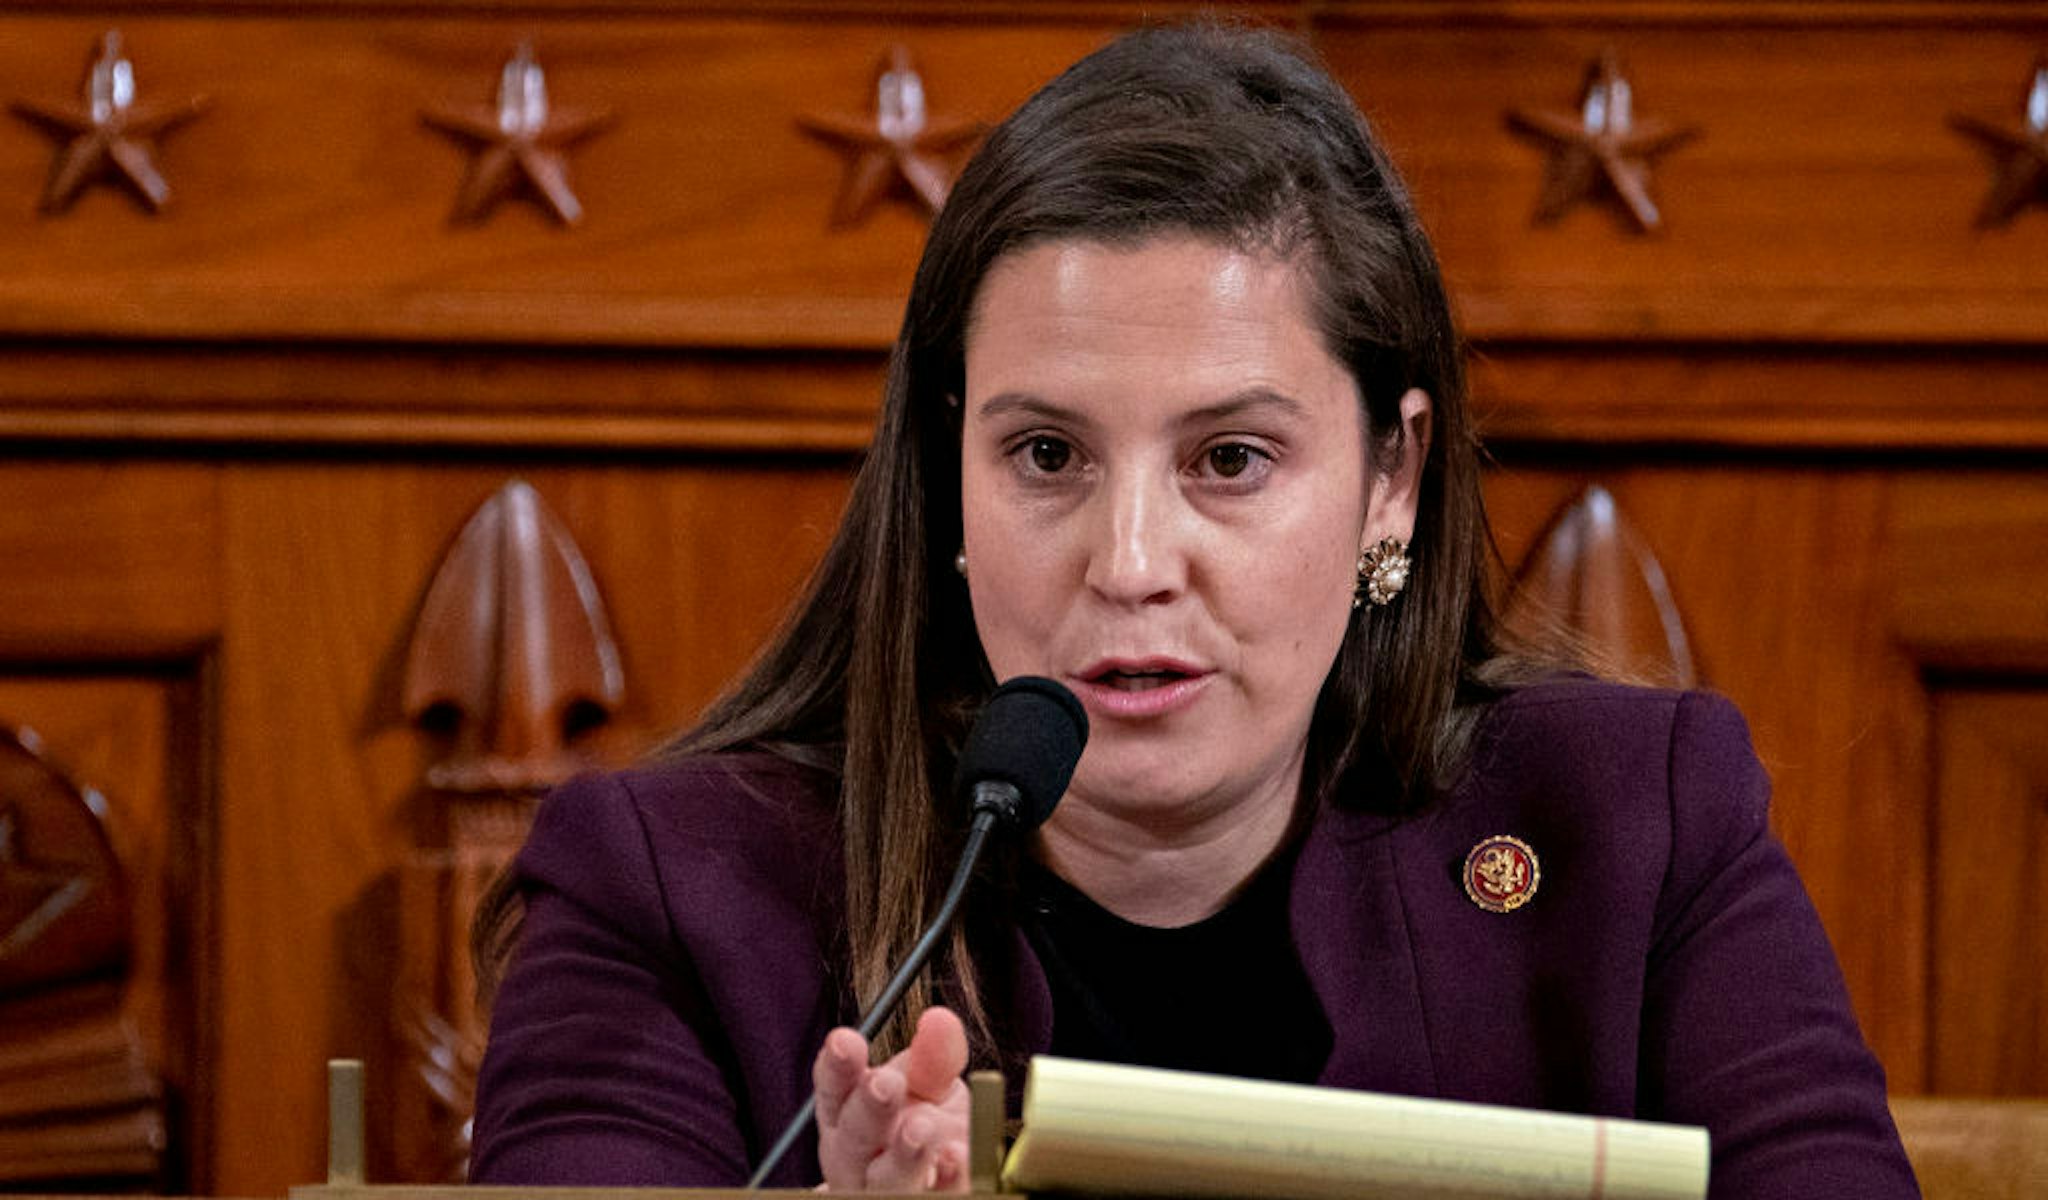 WASHINGTON, DC - NOVEMBER 21: Representative Elise Stefanik, a Republican from New York, questions witnesses during a House Intelligence Committee impeachment inquiry hearing on Capitol Hill November 21, 2019 in Washington, DC. The committee heard testimony during the fifth day of open hearings in the impeachment inquiry against U.S. President Donald Trump, whom House Democrats say held back U.S. military aid for Ukraine while demanding it investigate his political rivals. (Photo by Andrew Harrer-Pool/Getty Images)